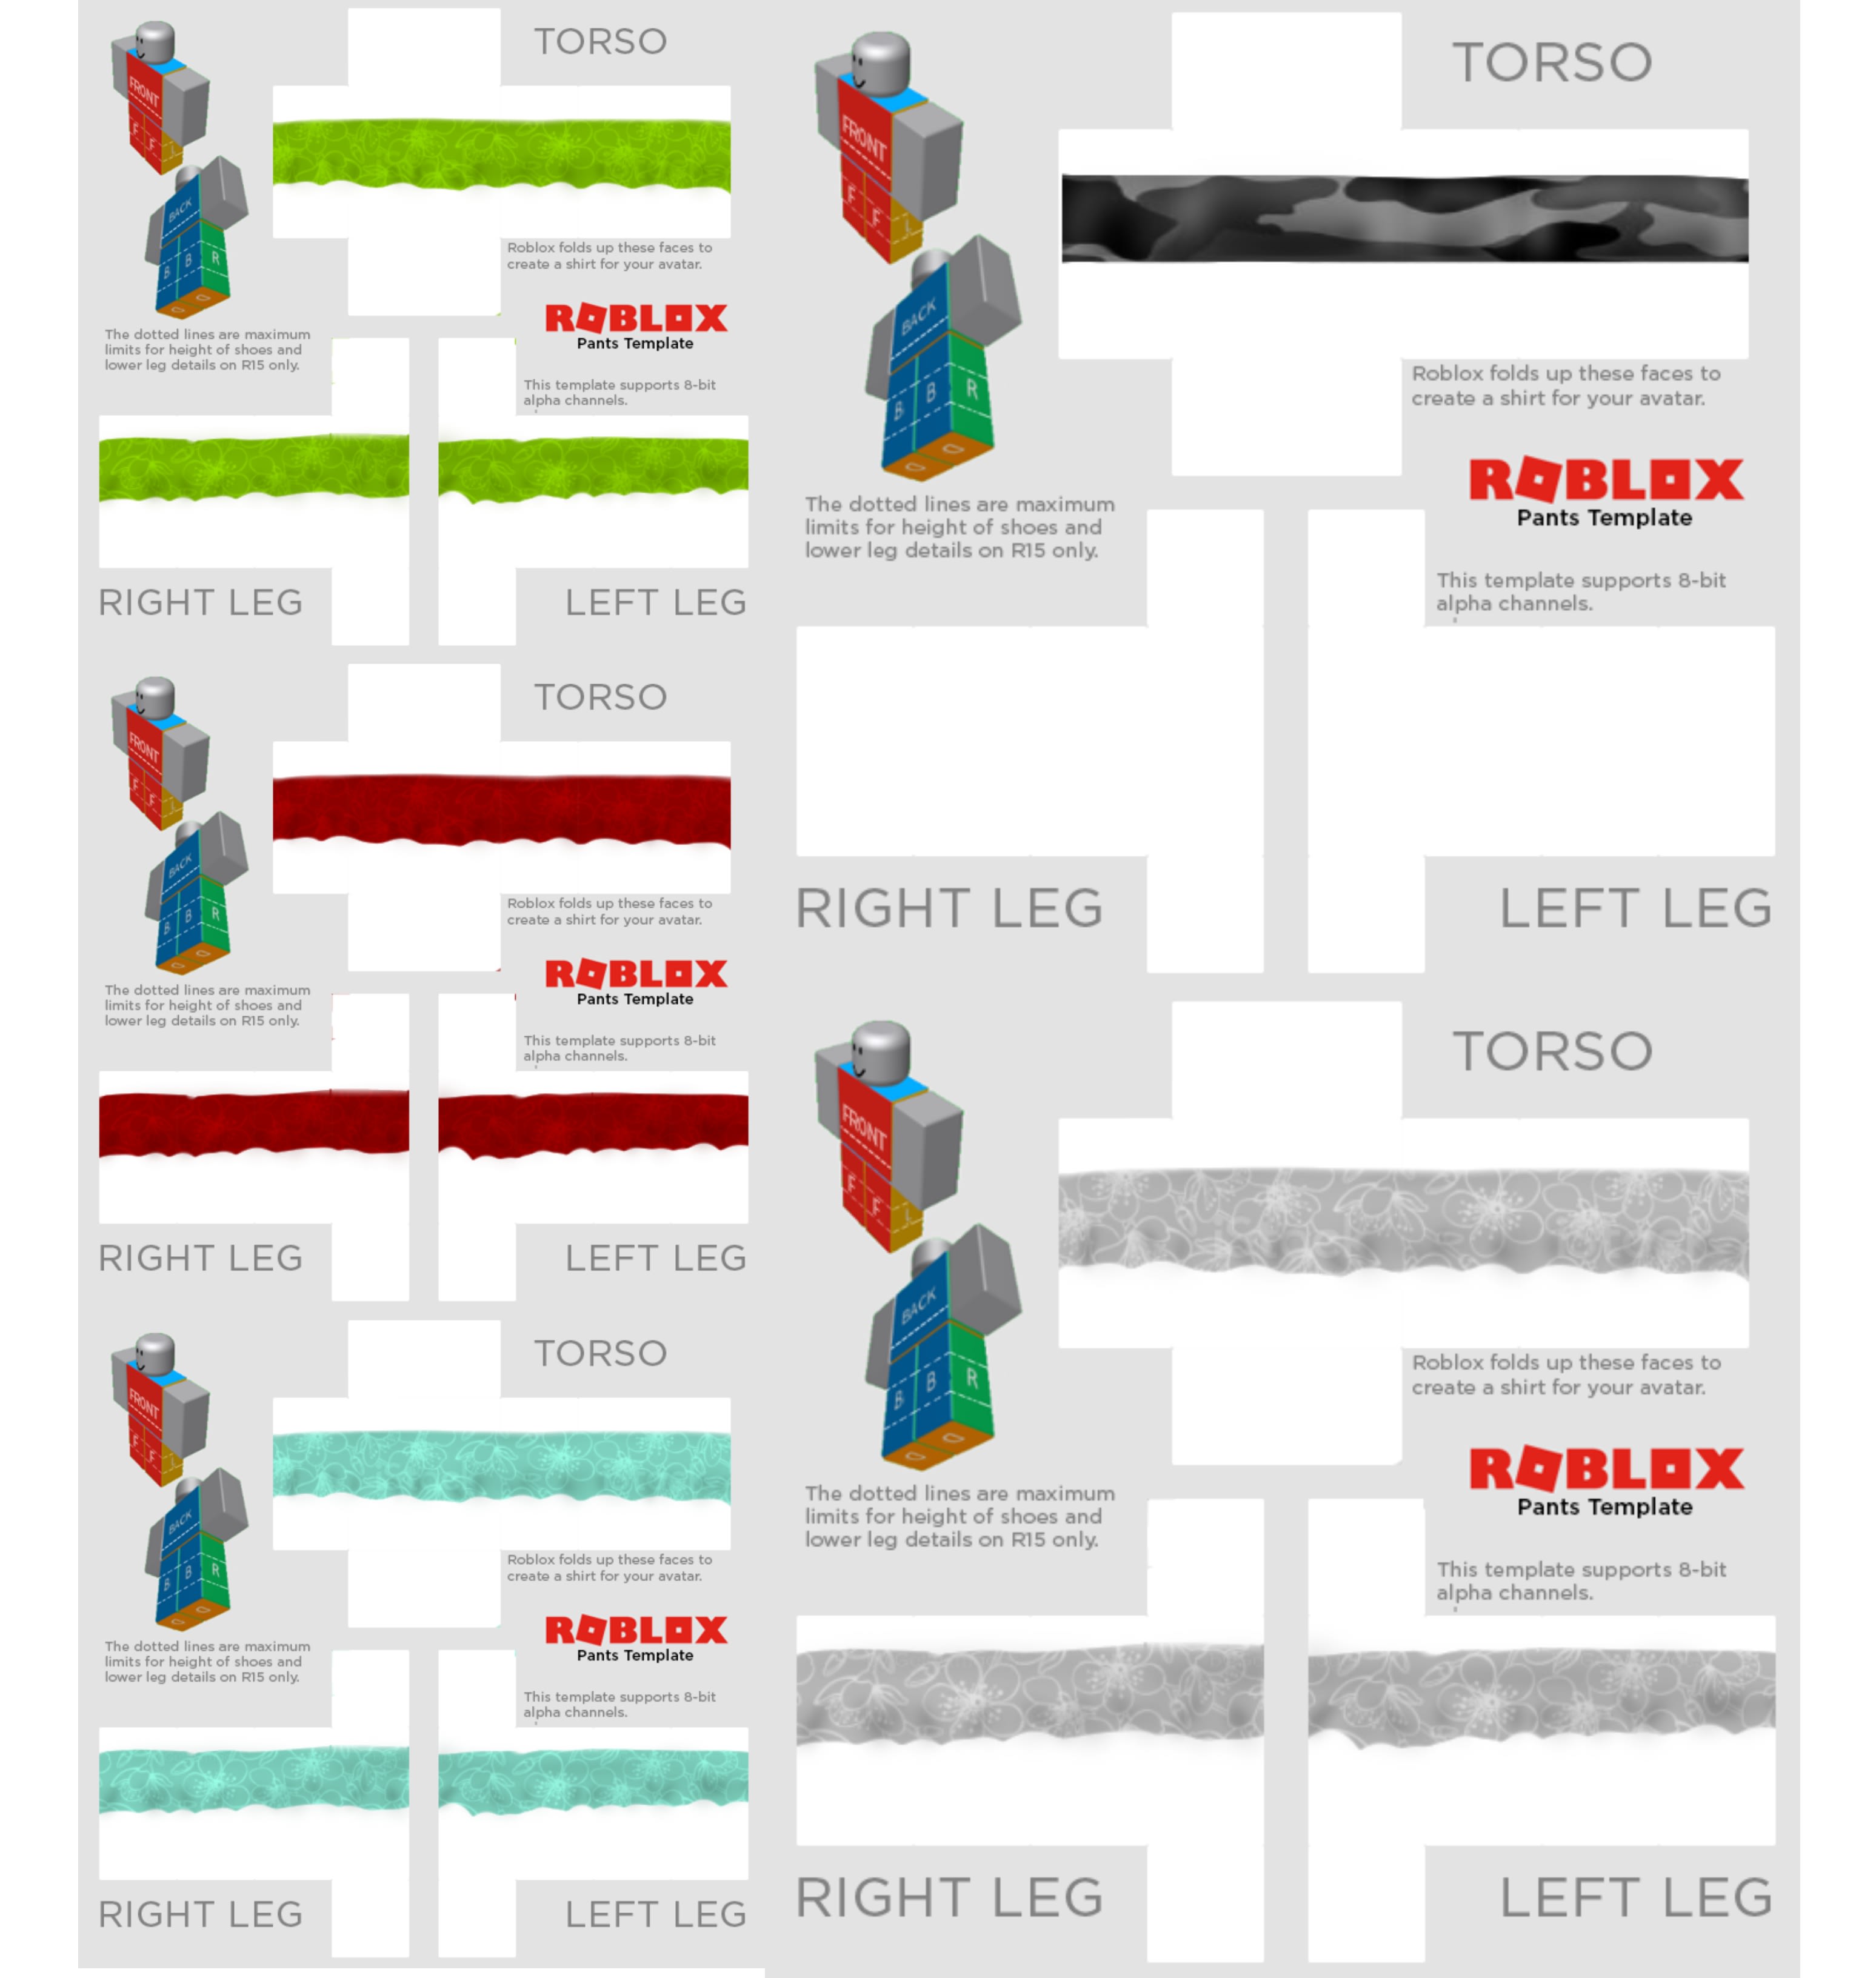 develop page for roblox making a shirt